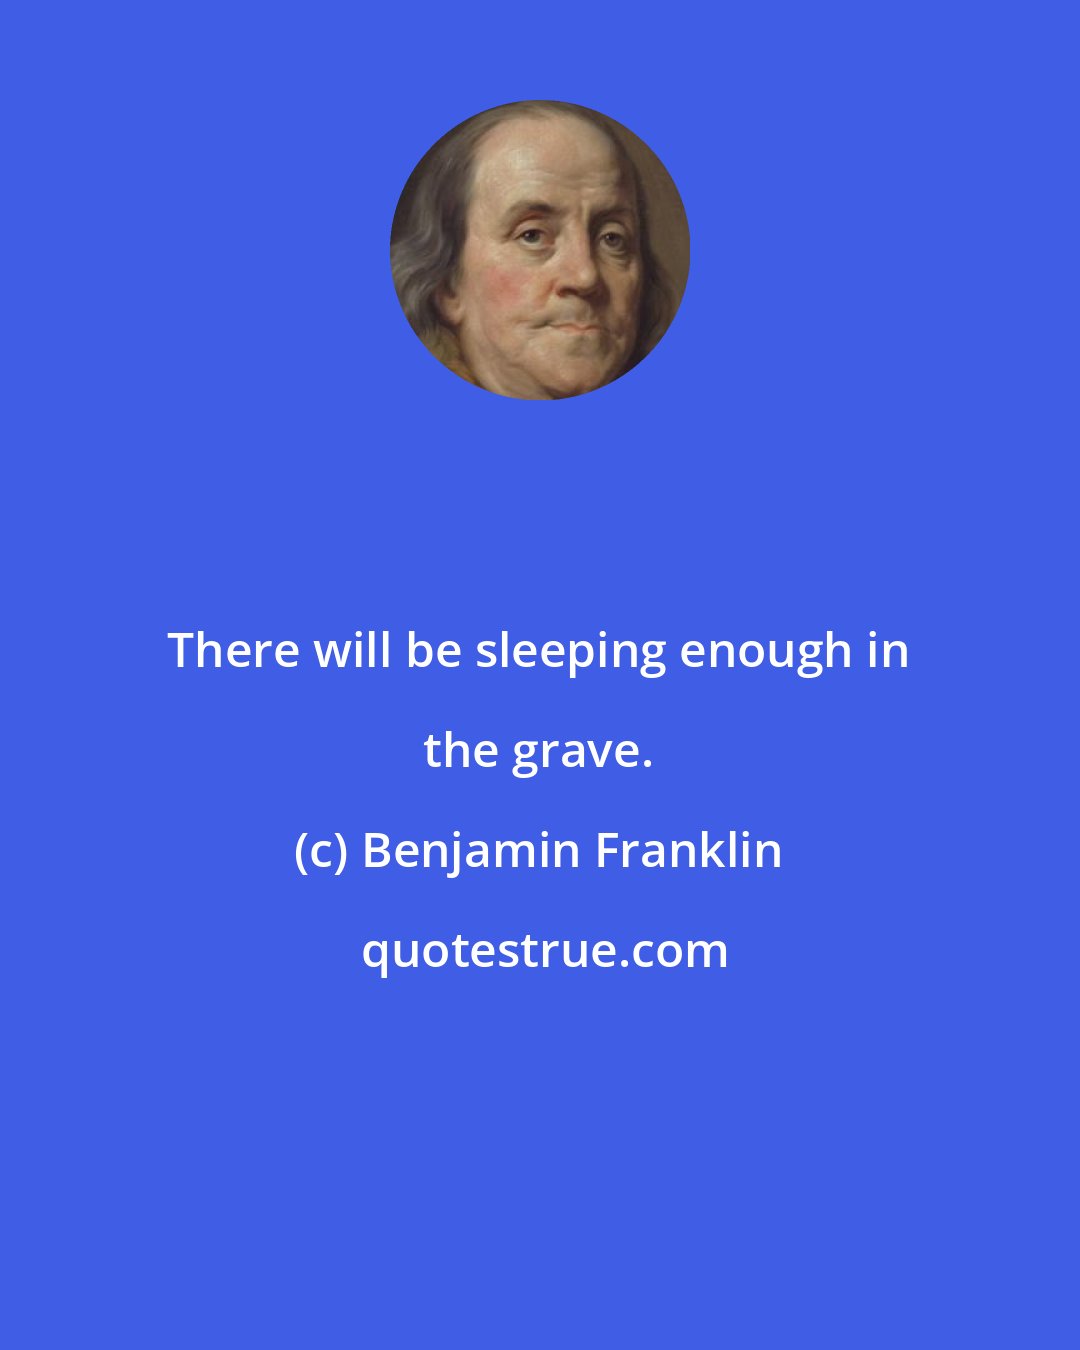 Benjamin Franklin: There will be sleeping enough in the grave.